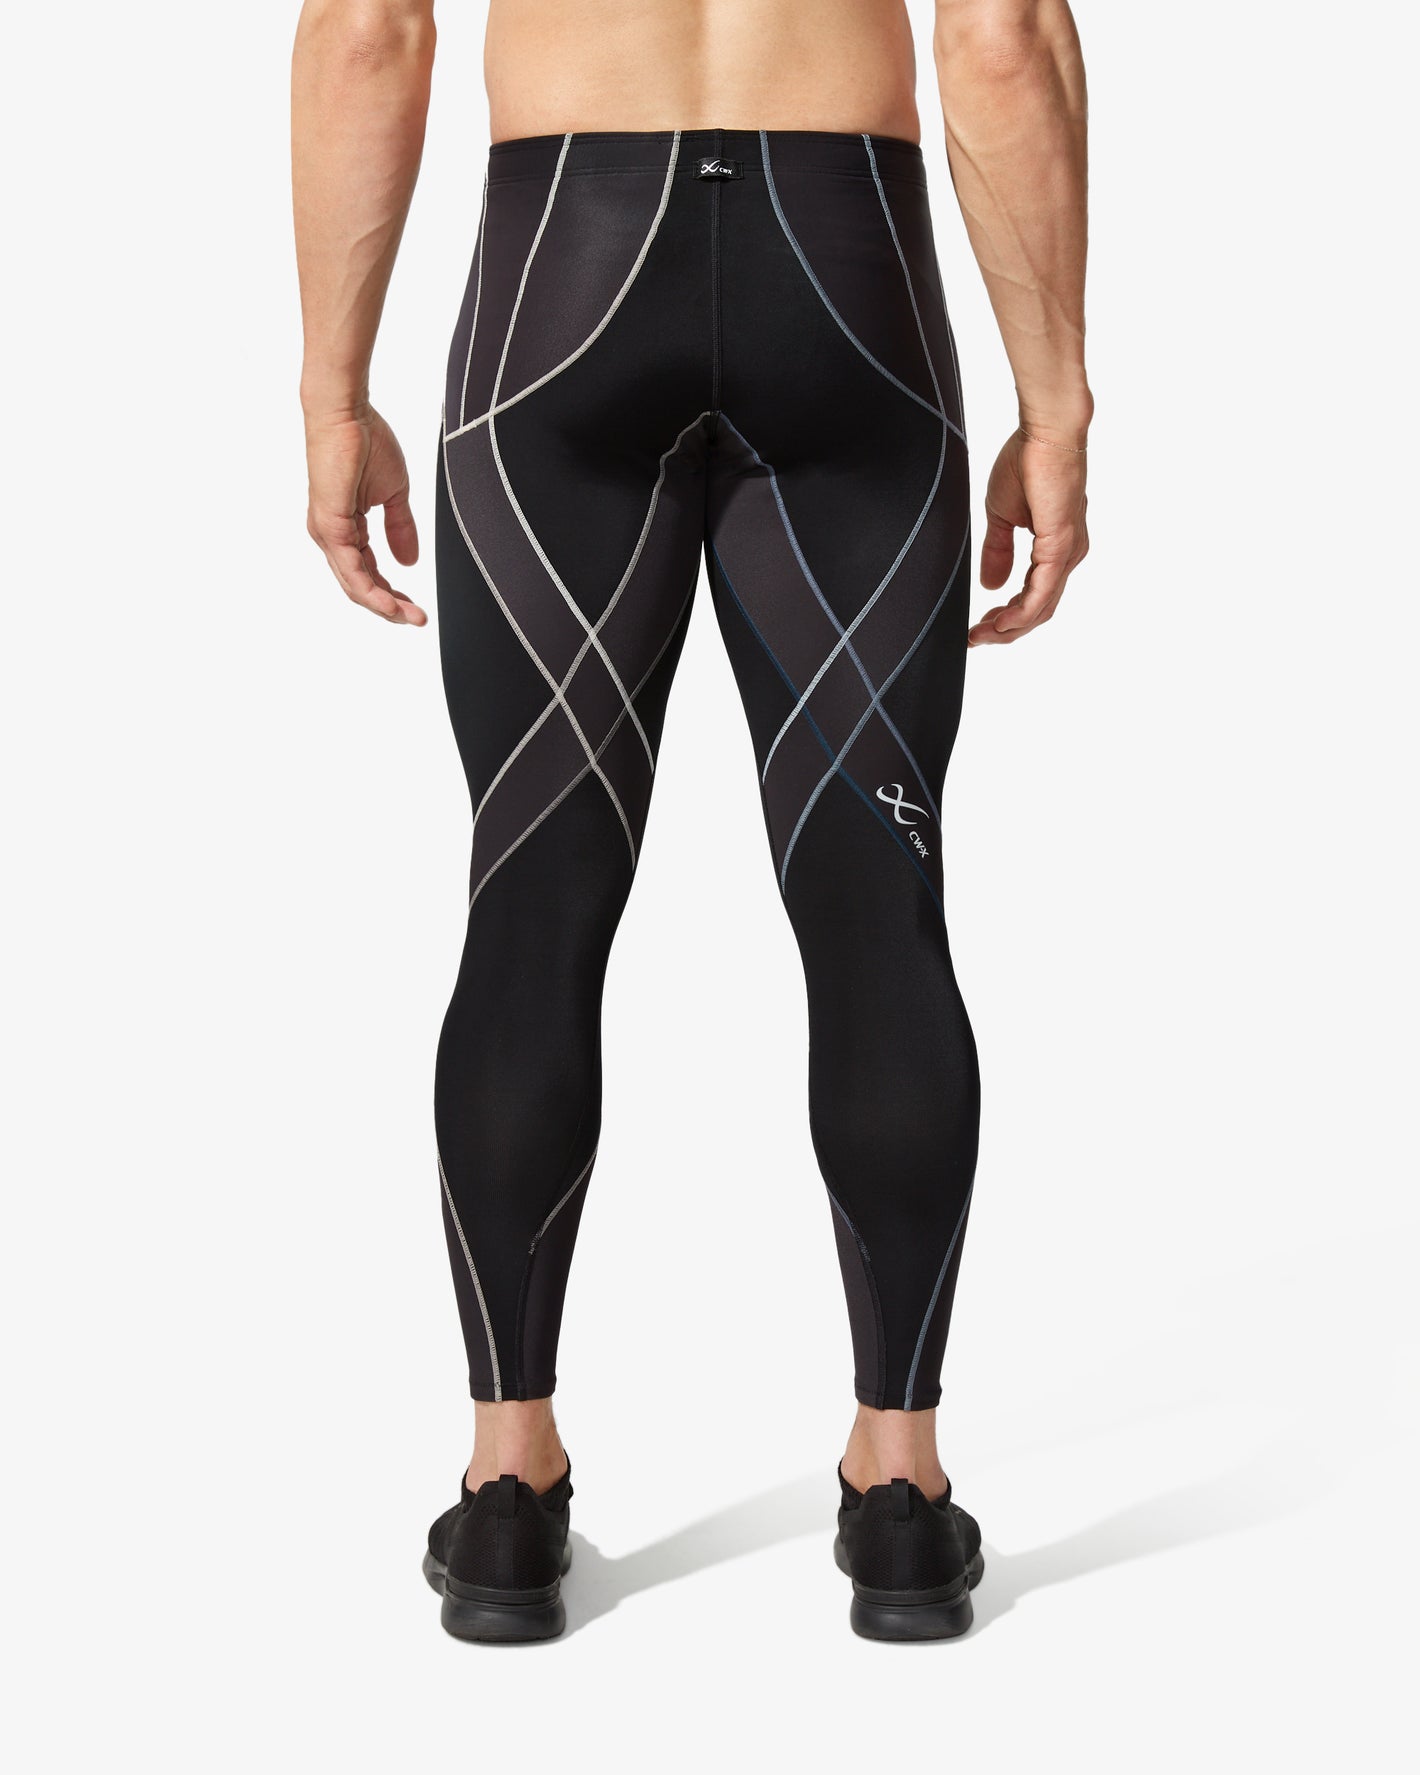 CW-X, Other, Cwx Compression Tights For Running Or Training